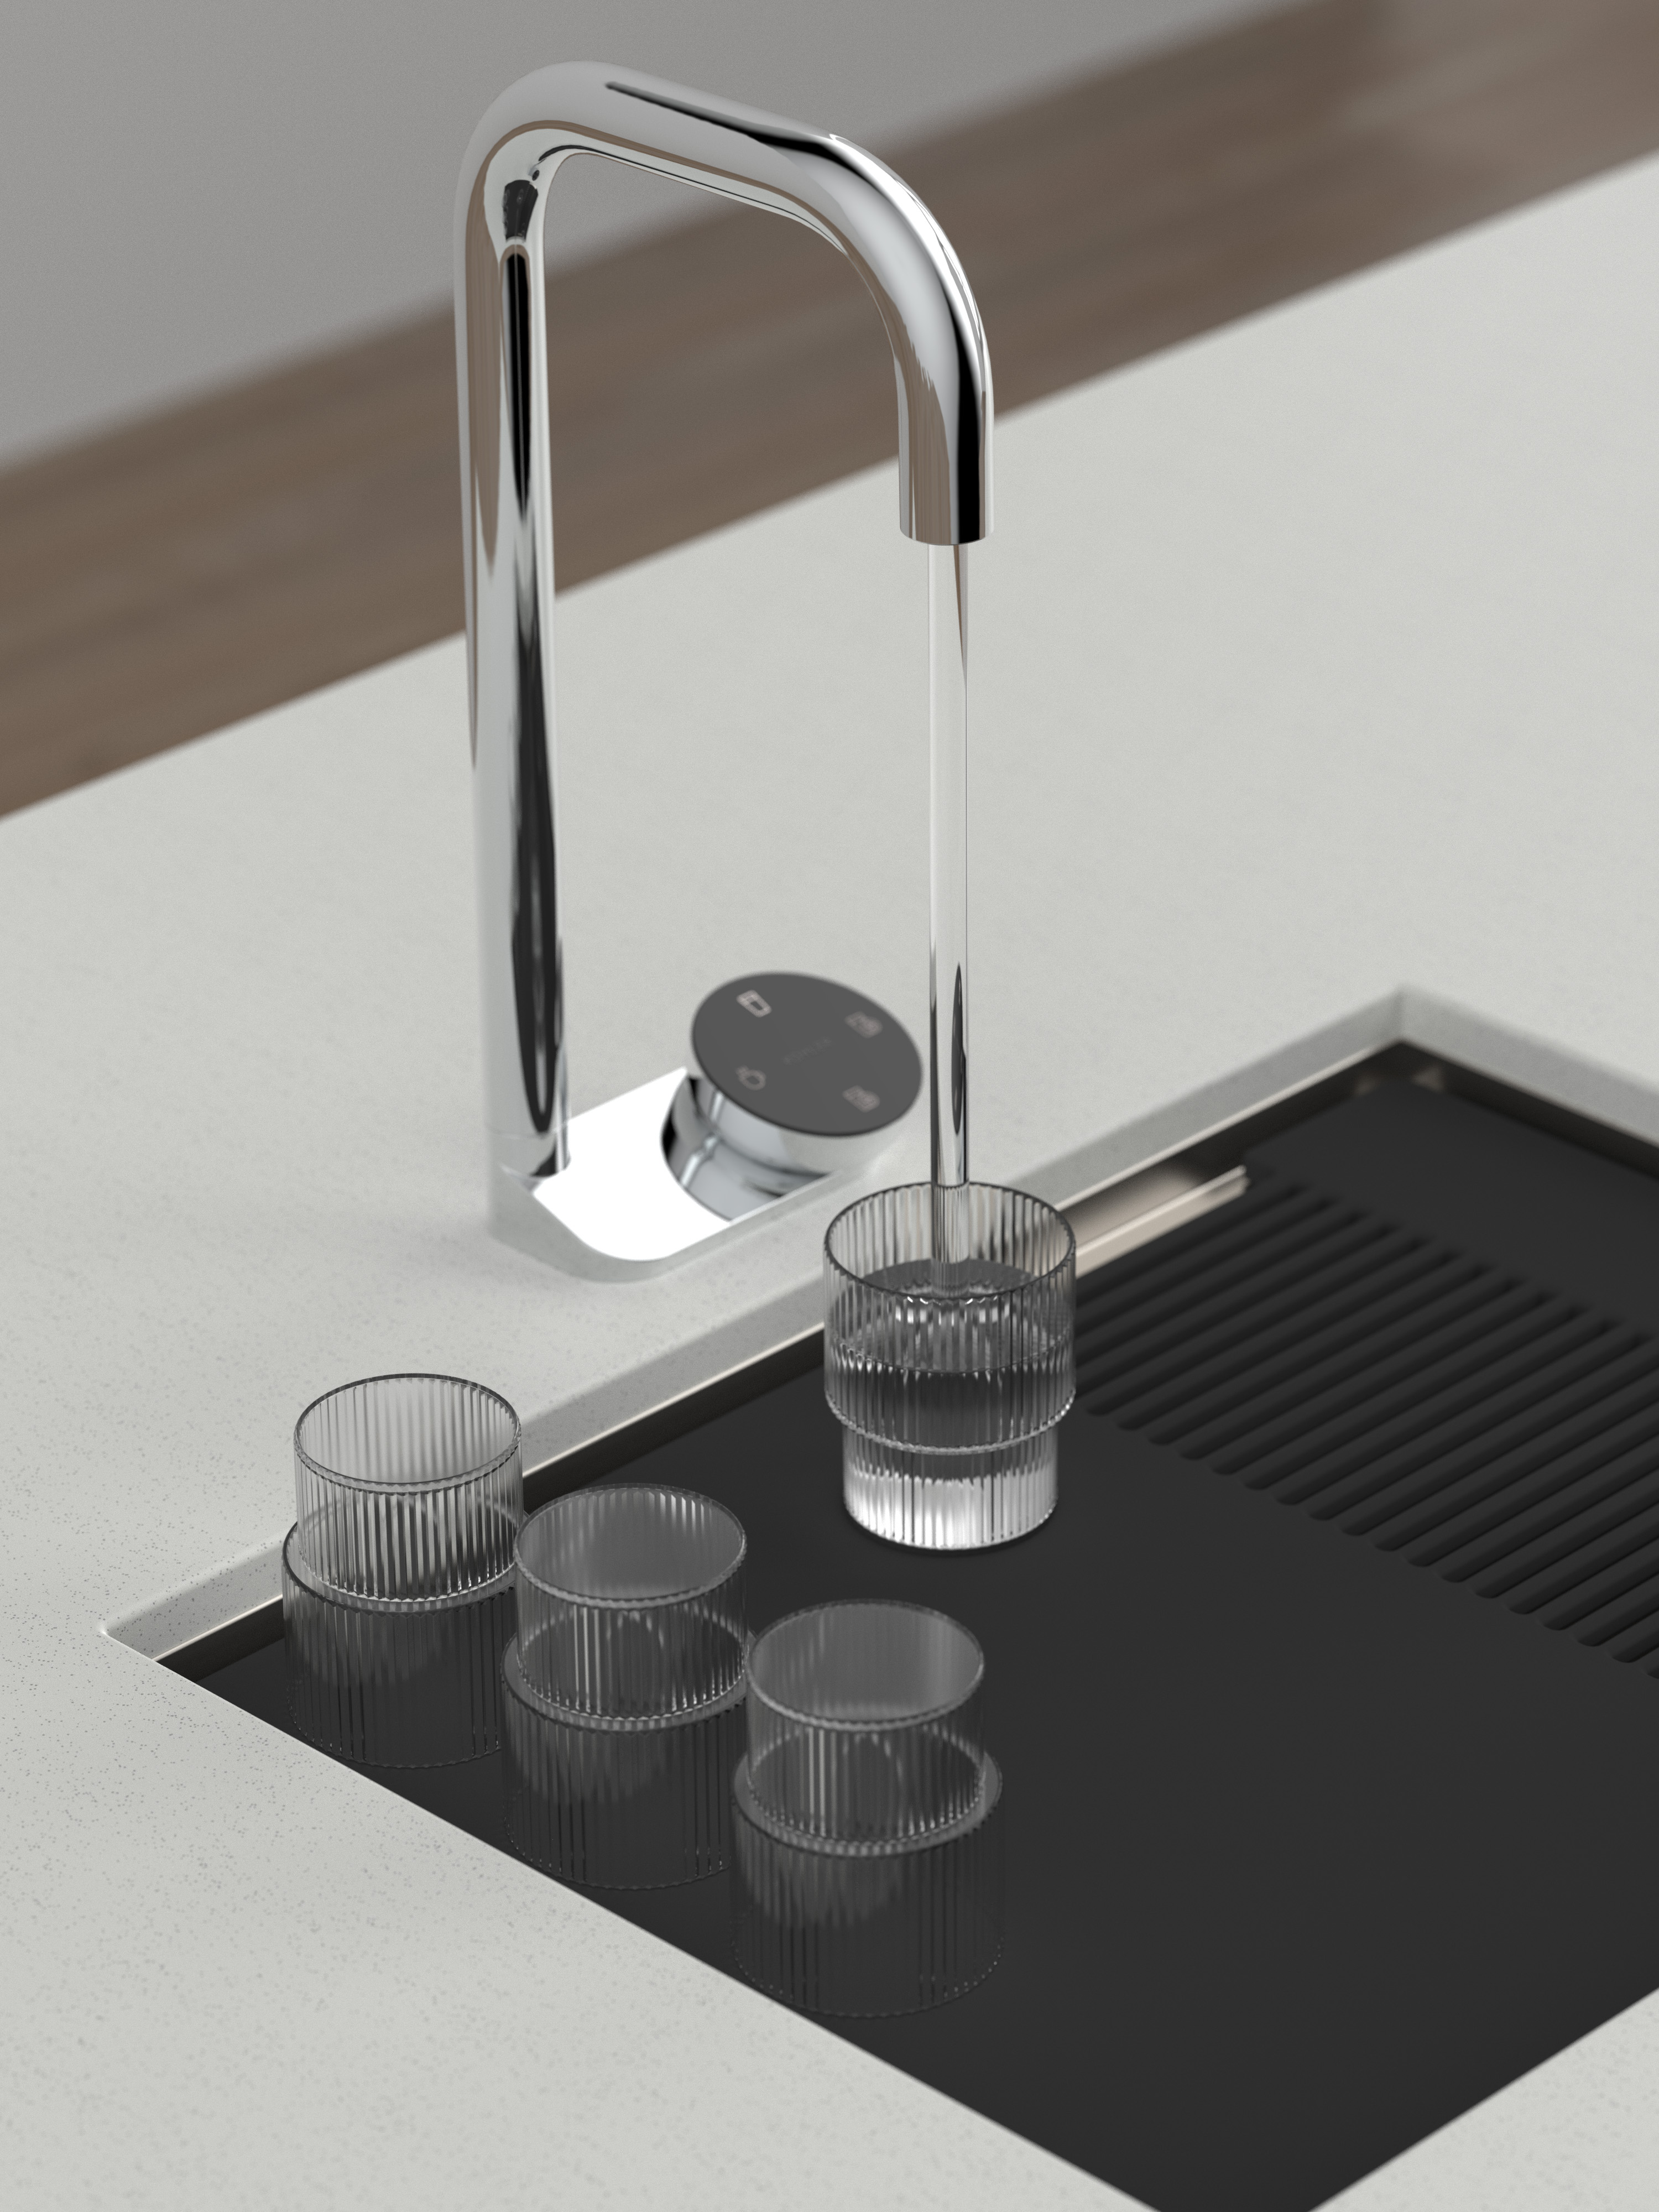 All-in-one Beverage Faucet